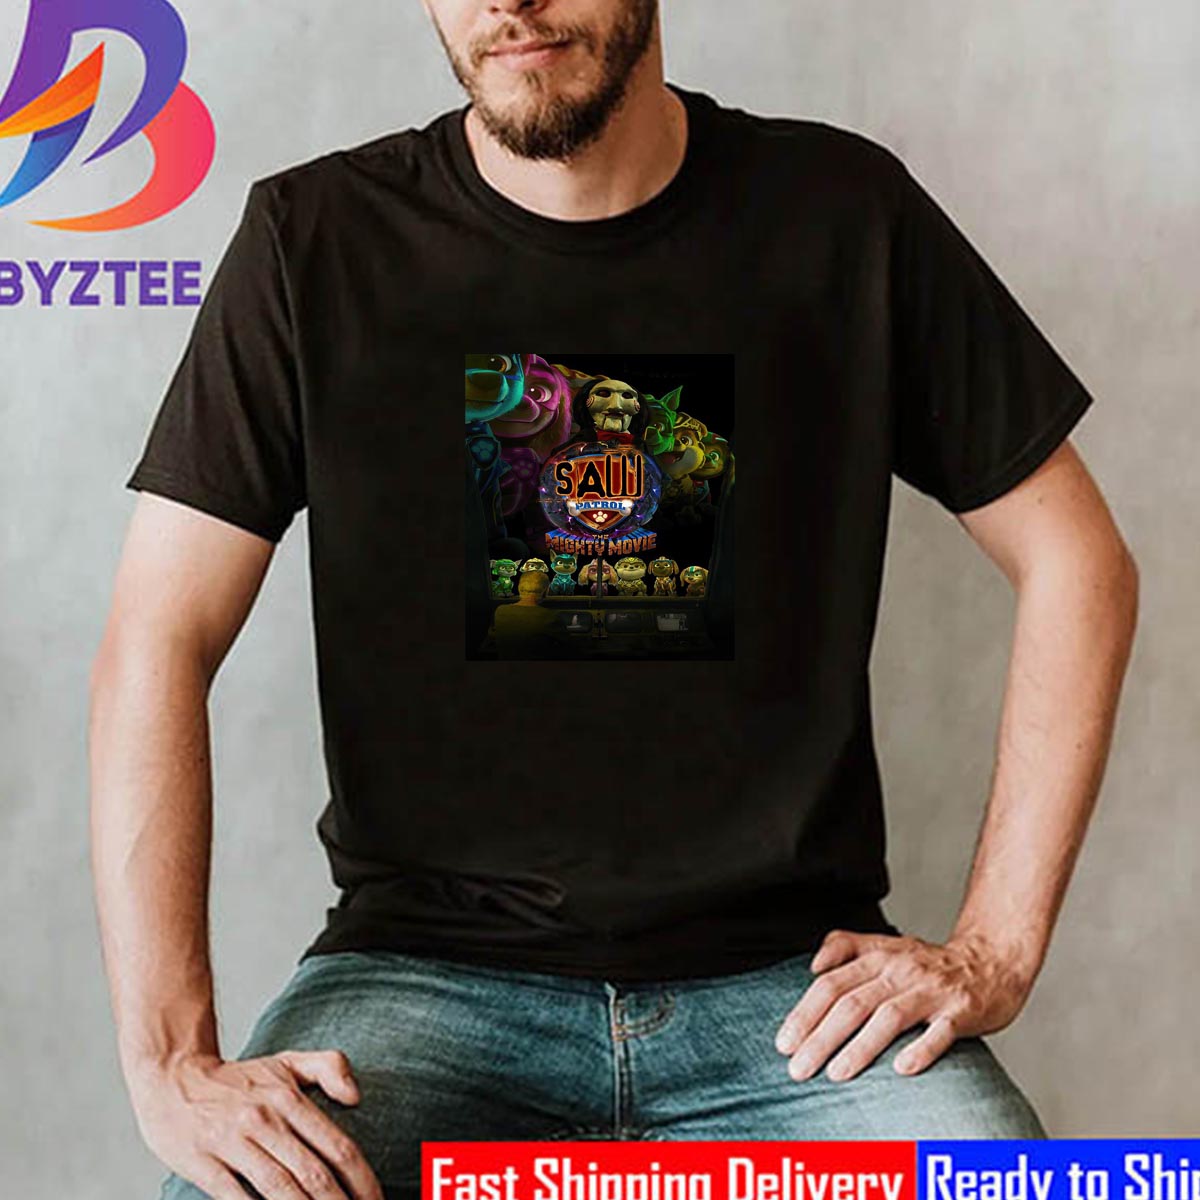 Saw X Paw Movie Poster - The Patrol Classic collab T-Shirt Mighty Byztee